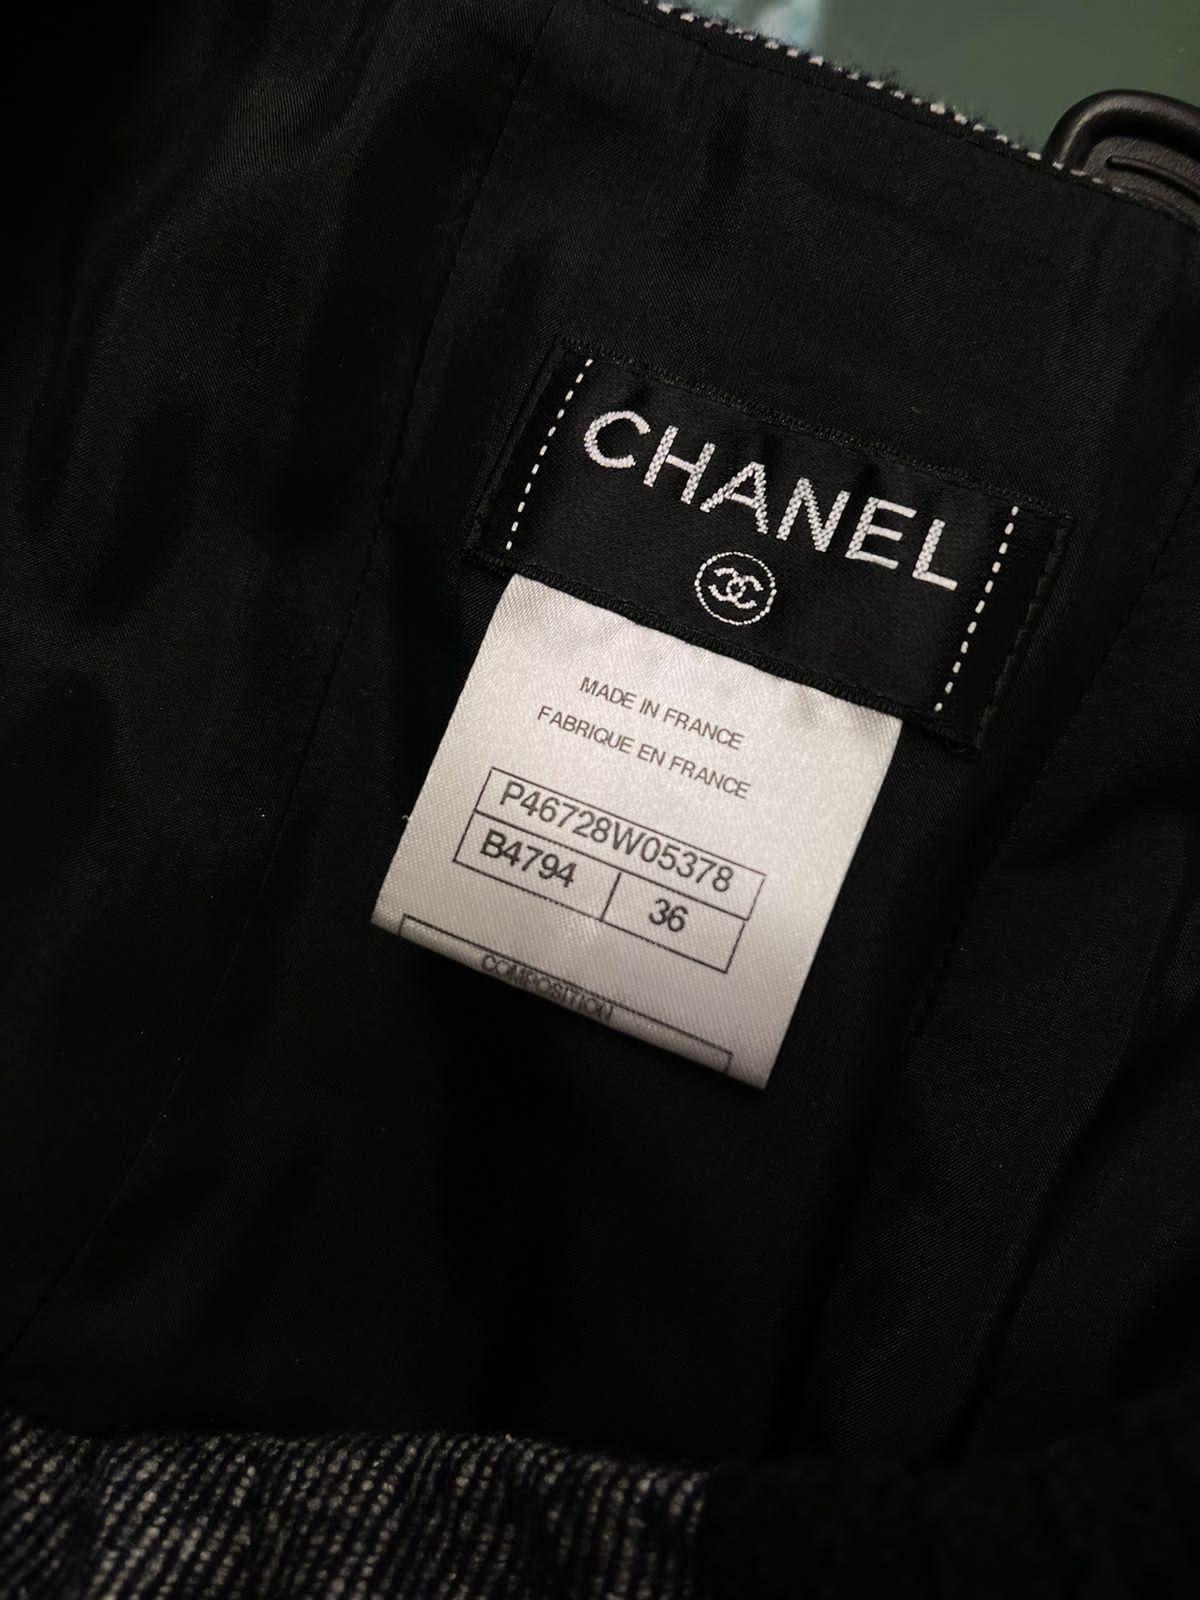 Chanel New Rib Velvet and Tweed Jacket and Skirt Suit 6